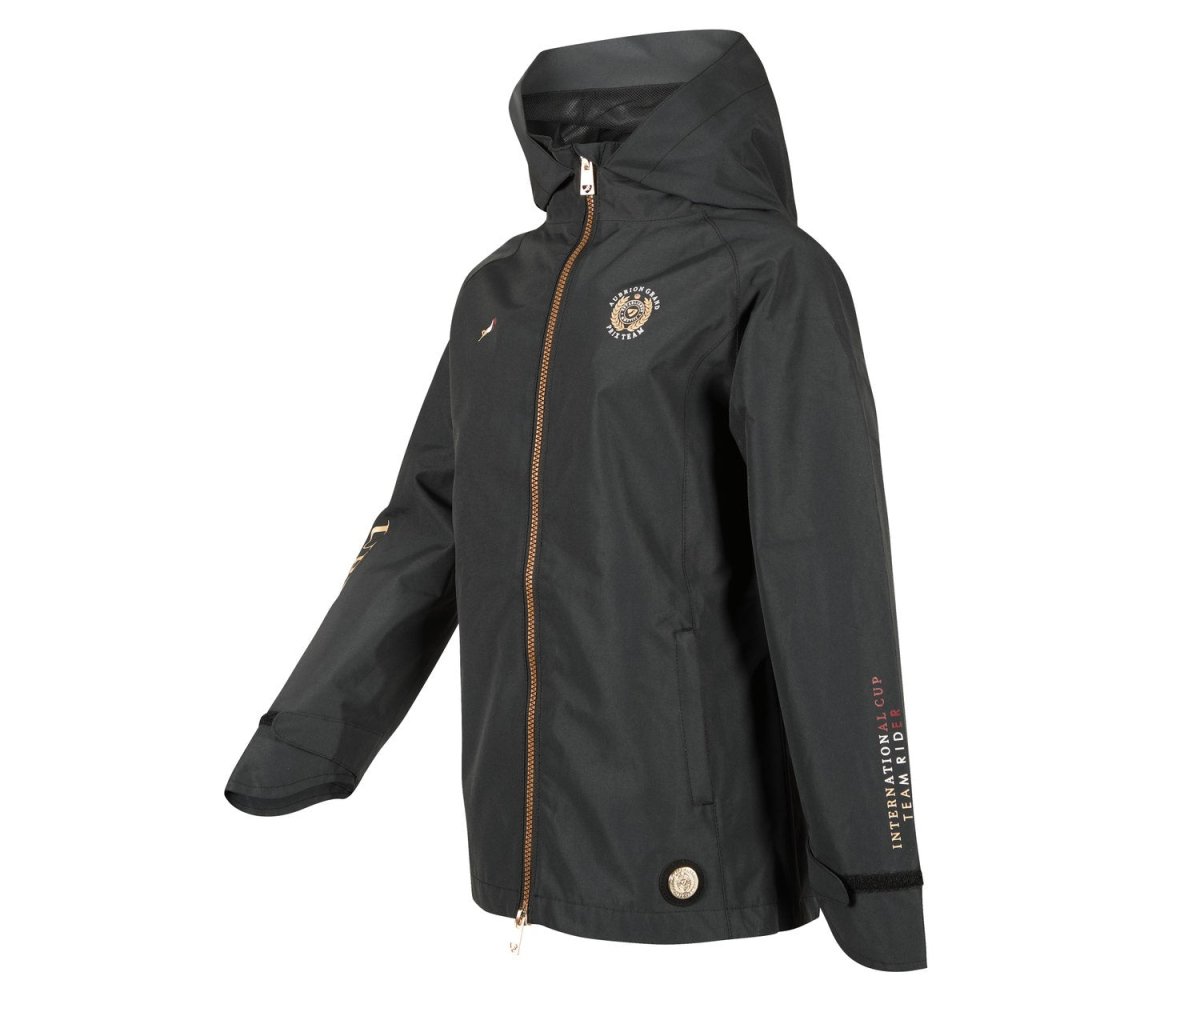 Aubrion SS24 Team Waterproof Jacket - Young Rider - Black - 11/12 Years